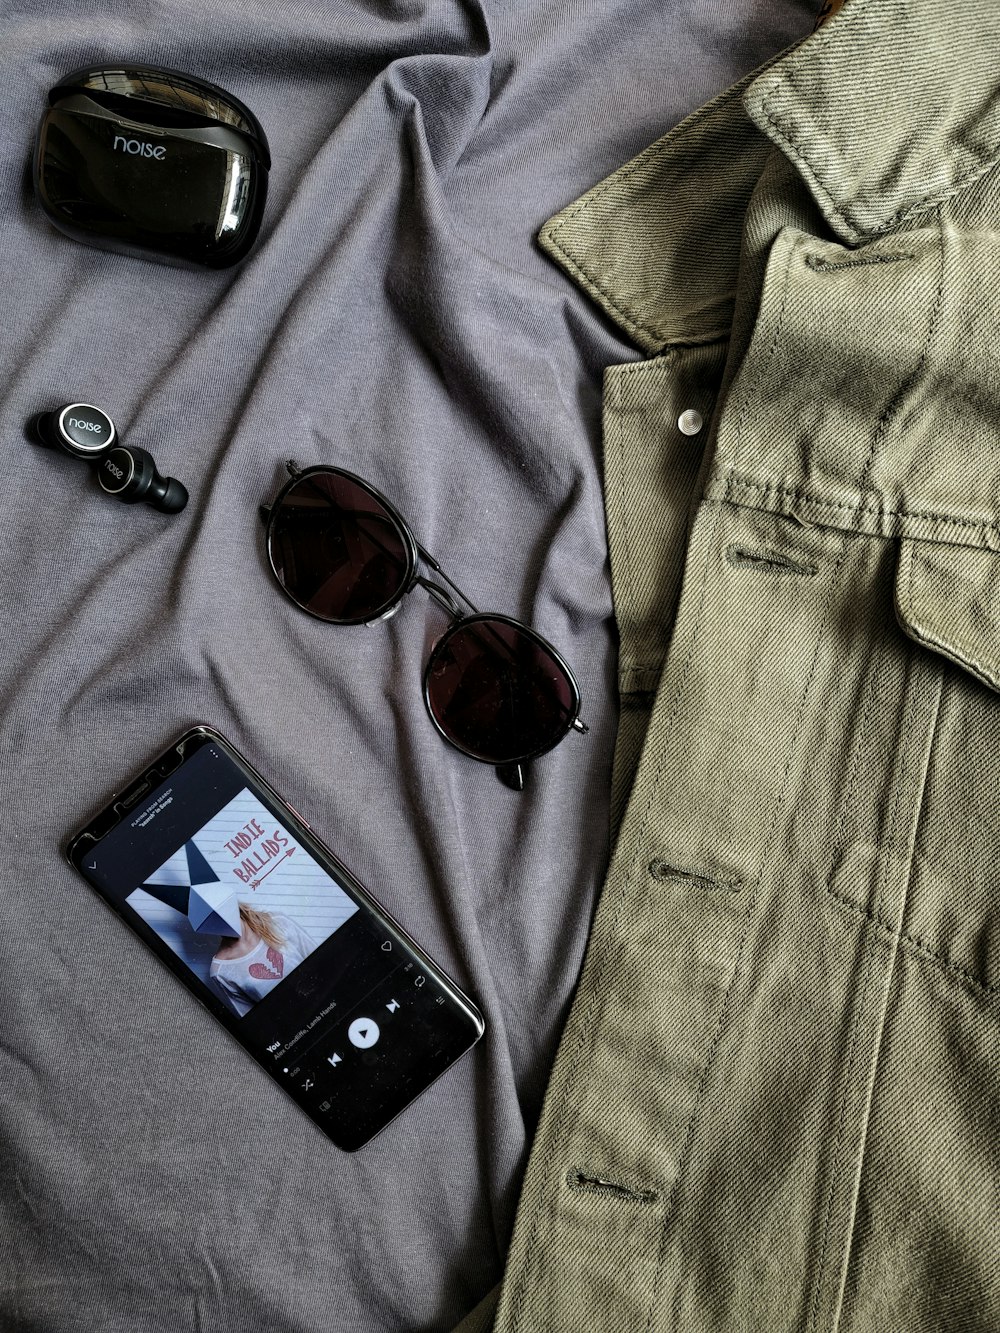 black iphone 4 beside brown framed sunglasses and gray denim button up shirt